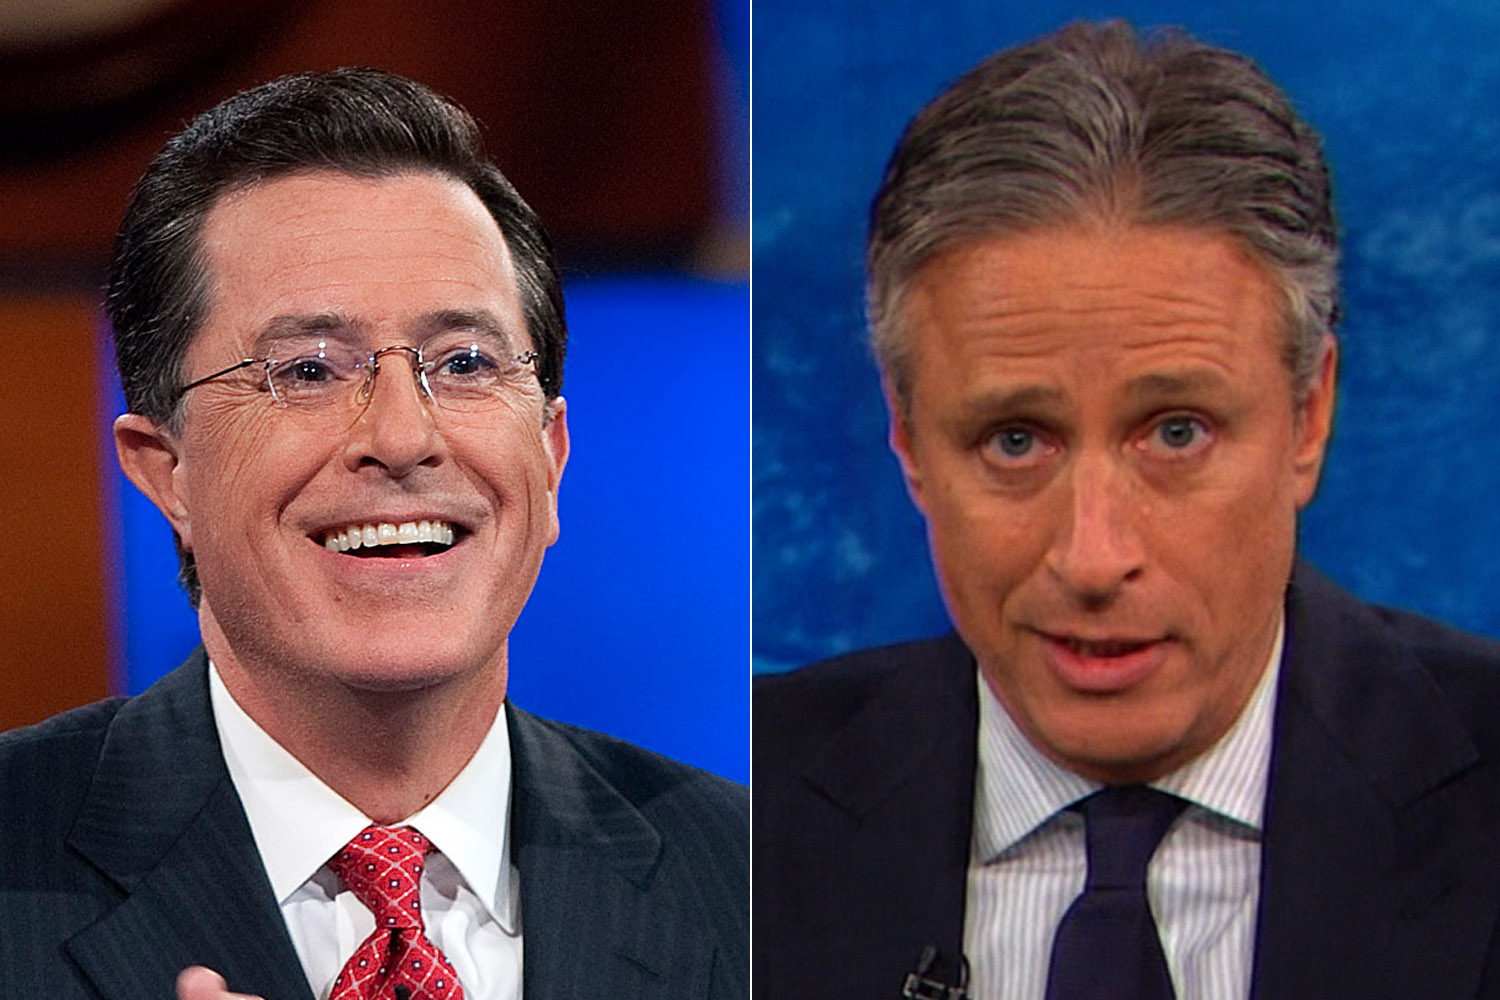 From left to right, Stephen Colbert and Jon Stewart. (Comedy Central)